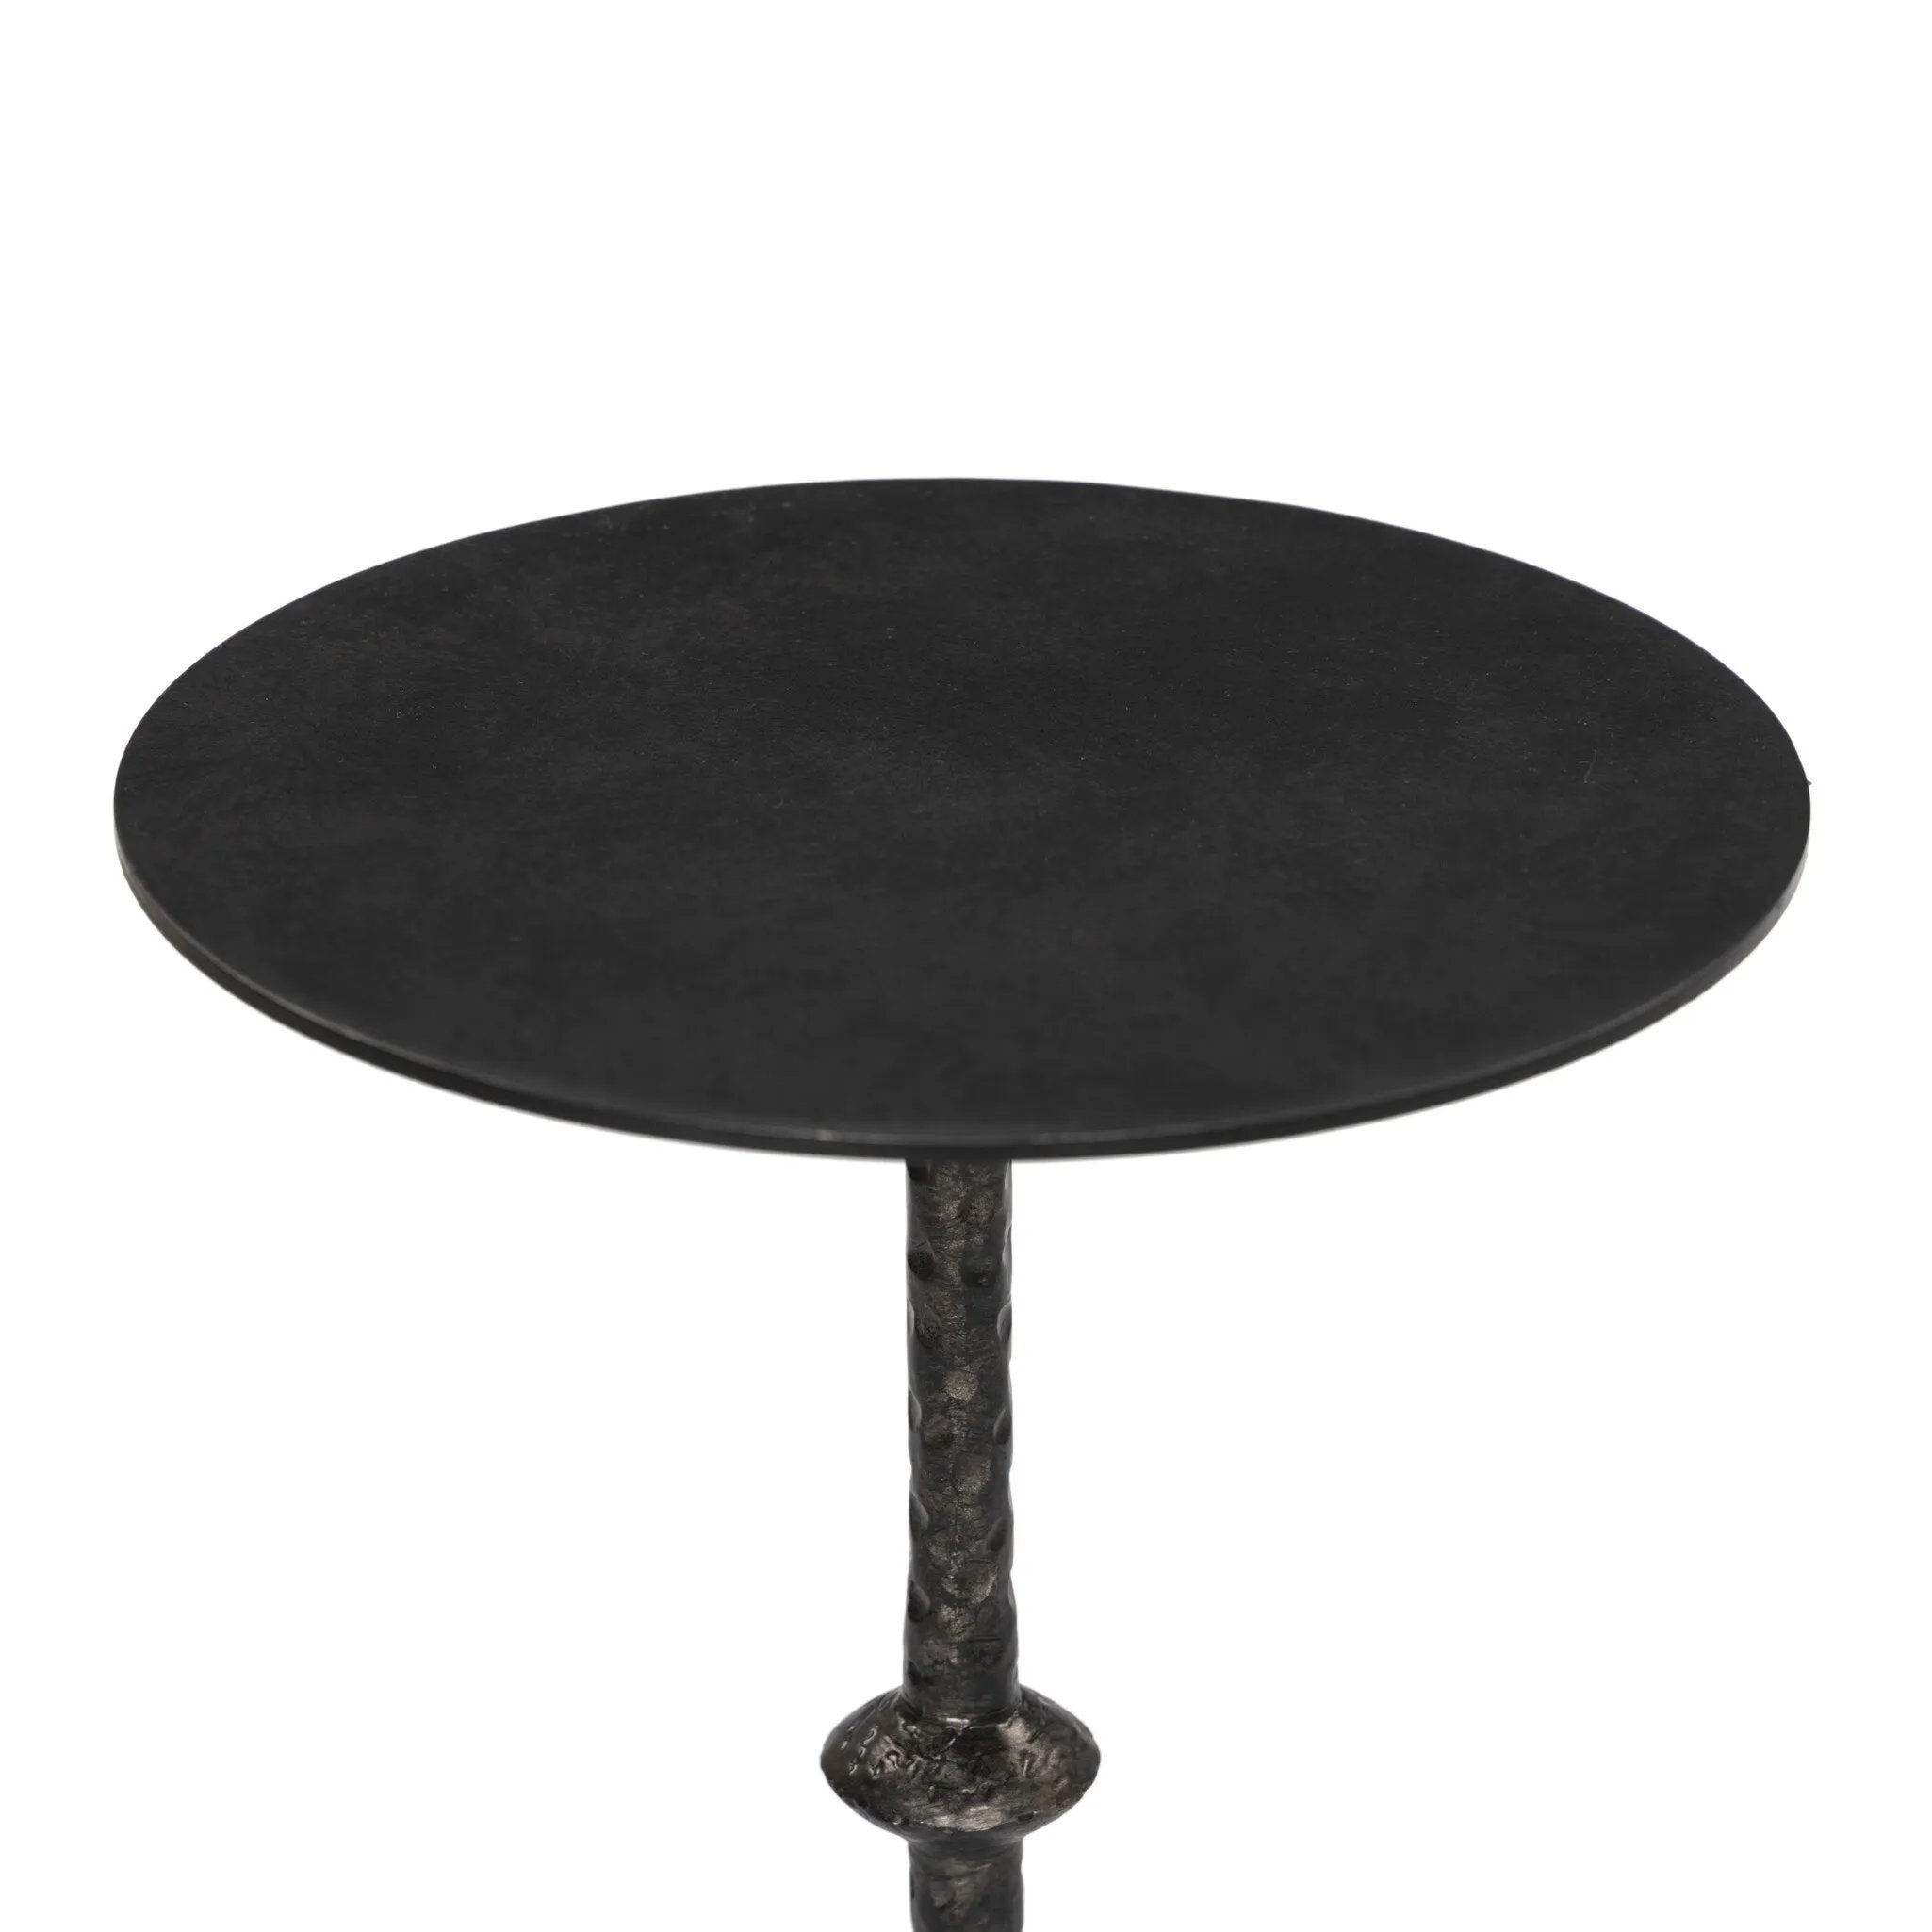 Formed from cast metal with a textured black finish, with turning details on the post for visual interest. Three curved legs are inspired by classic antique metal tables.Collection: Marlo Amethyst Home provides interior design, new home construction design consulting, vintage area rugs, and lighting in the Calabasas metro area.